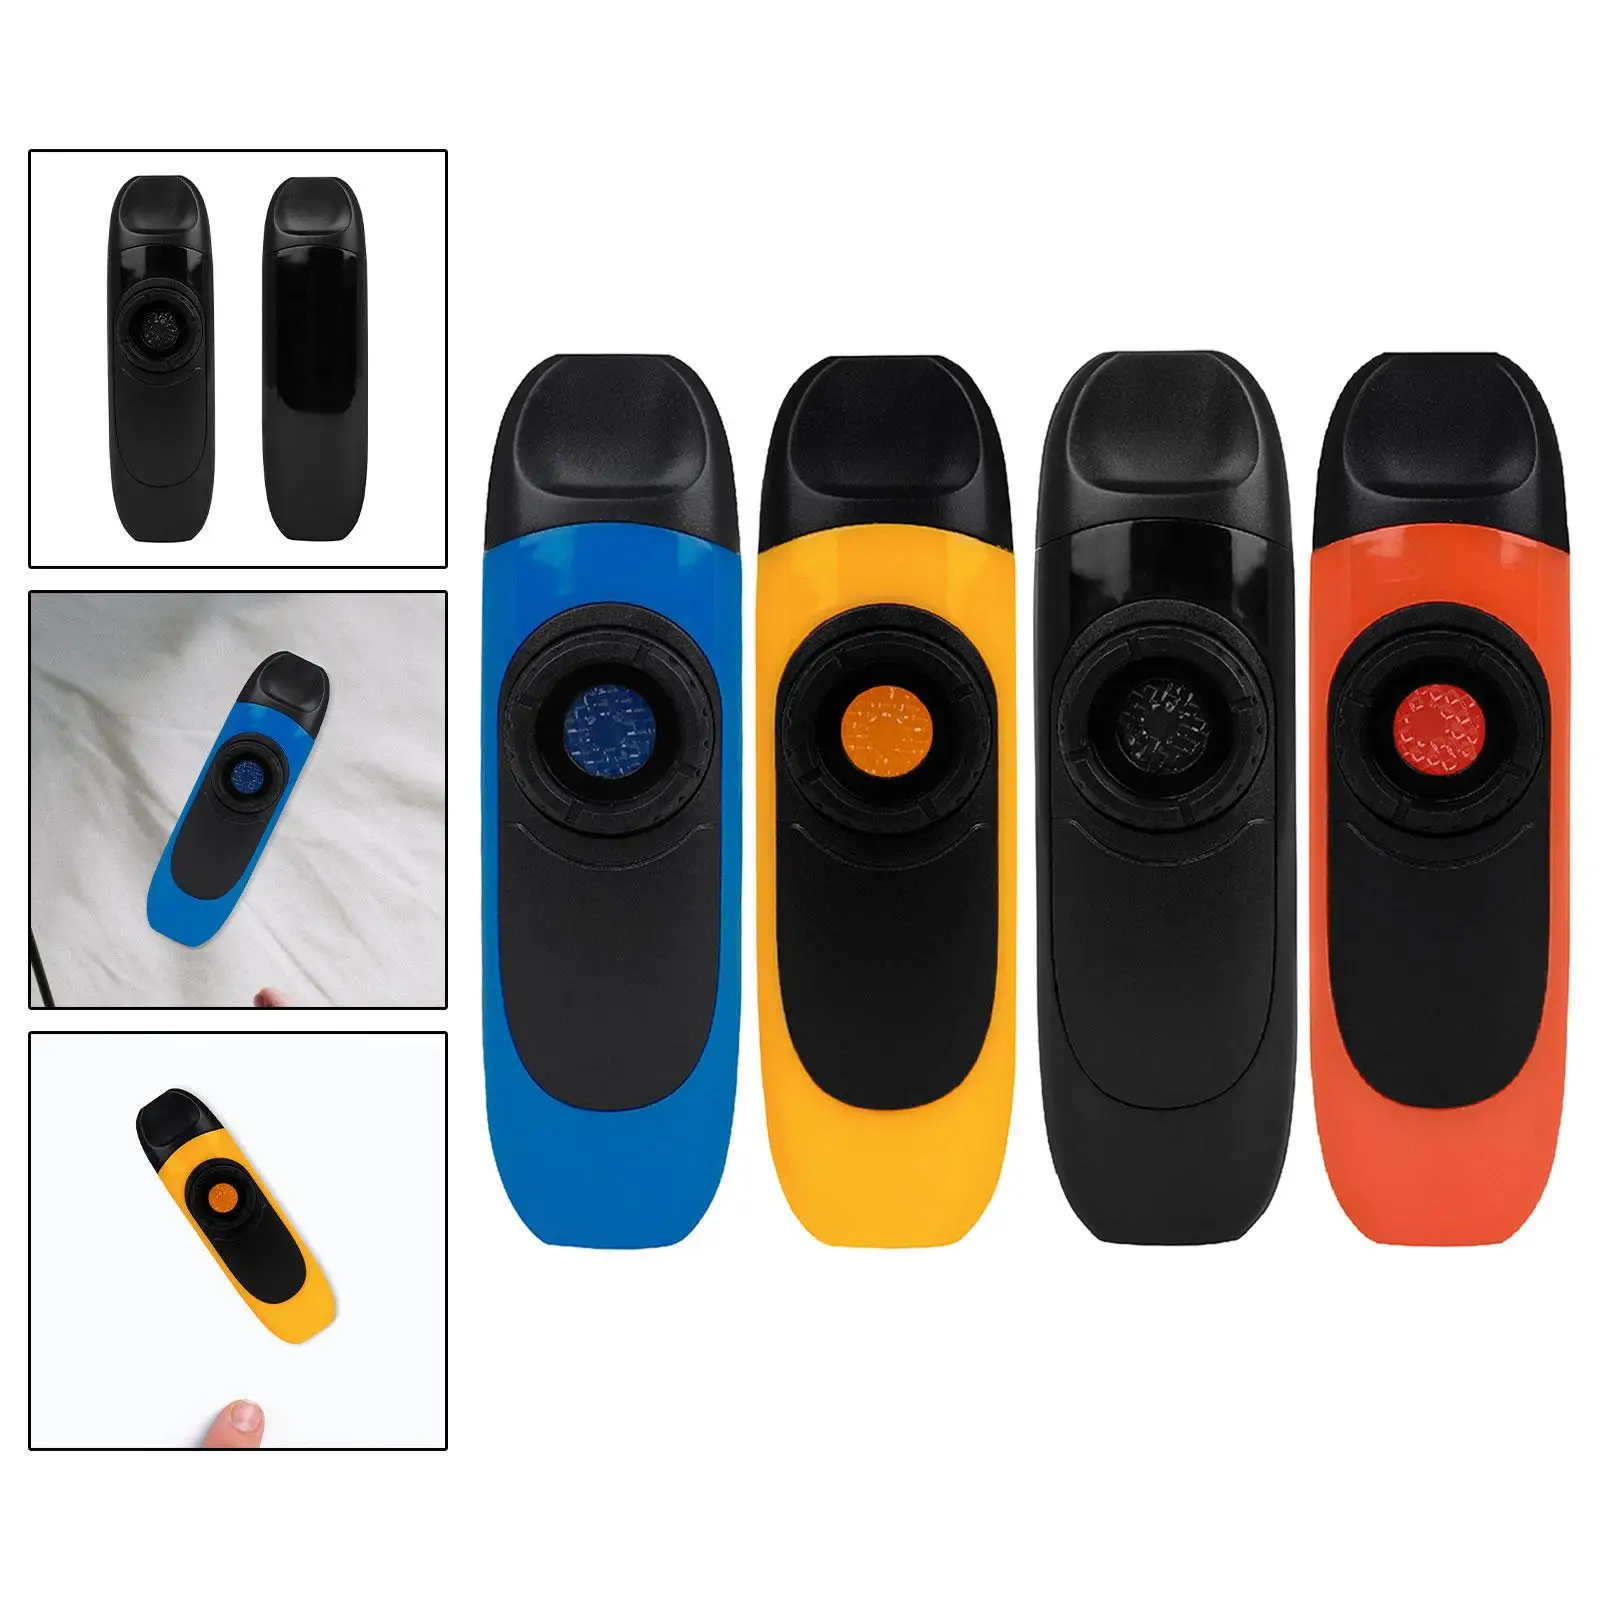 Kazoo Easy to Play Musical Instruments for Music Lovers Children Adults